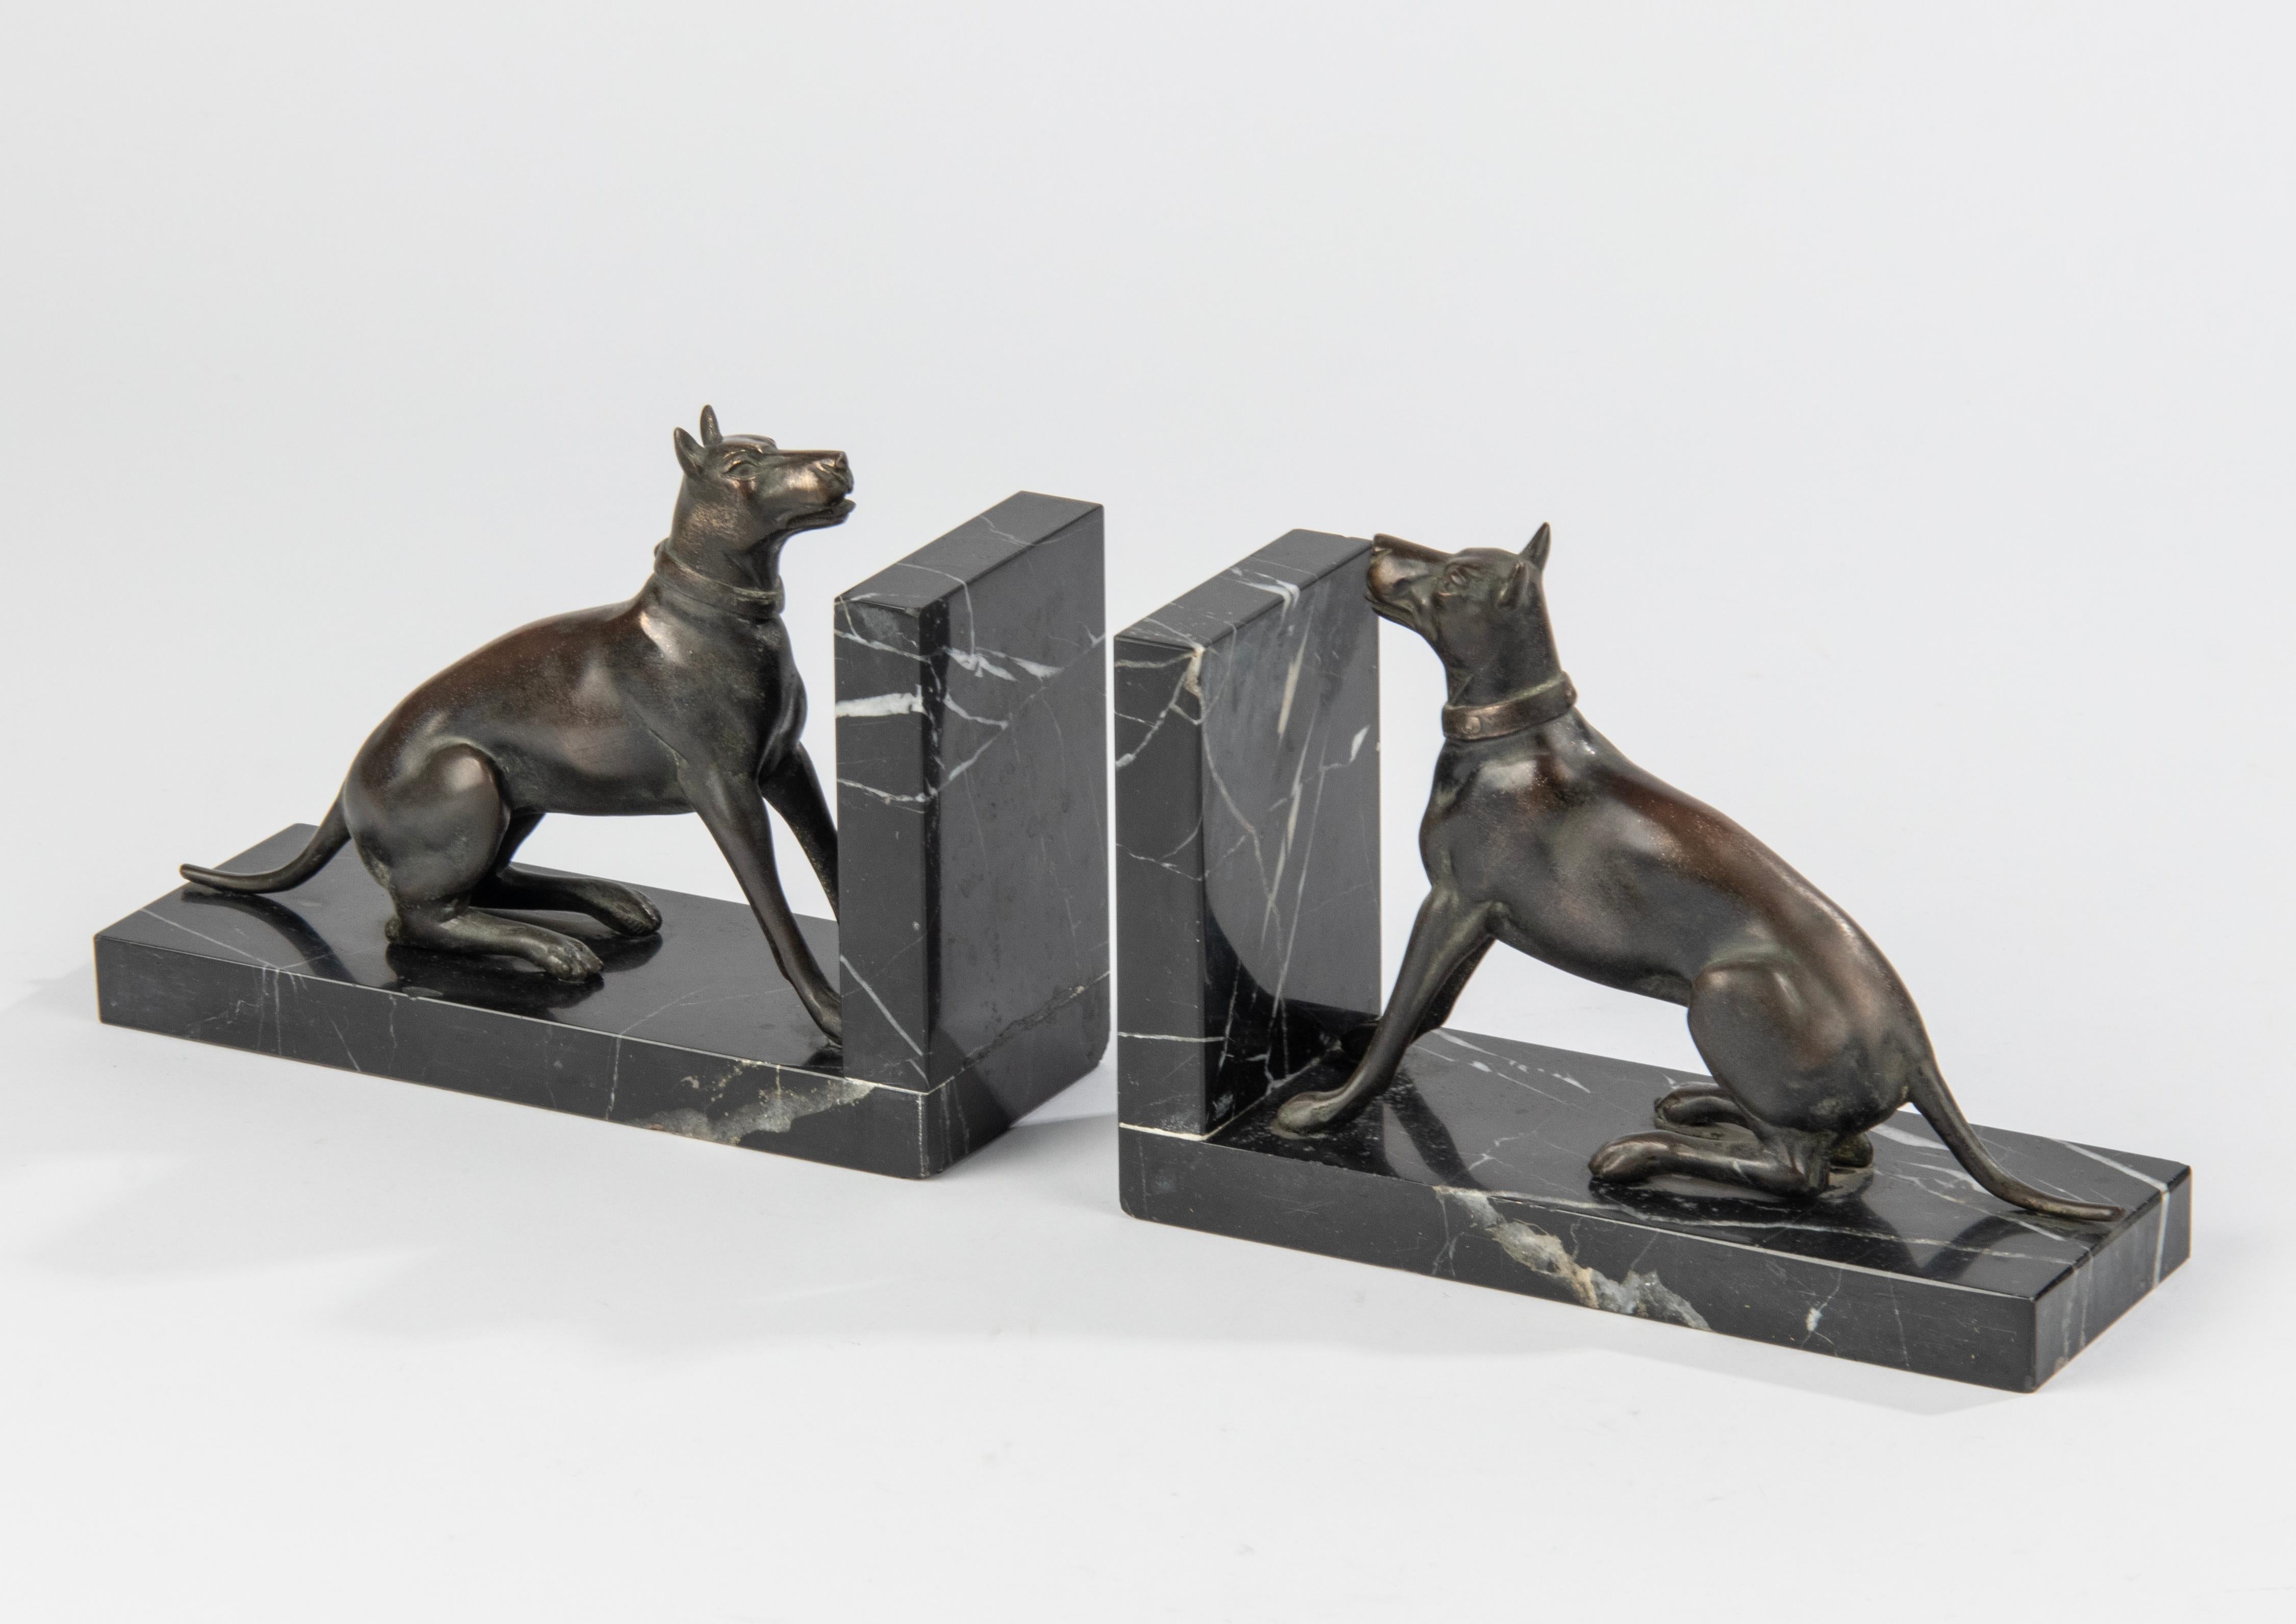 A pair of Art Deco bookends, with sculptures of dogs, probable Dansih dogs. The figurines are made of patinated spelter (zinc alloy). The plinths are made of Black marble with white veins. Marble and figurines are in good condition. Some wear of age